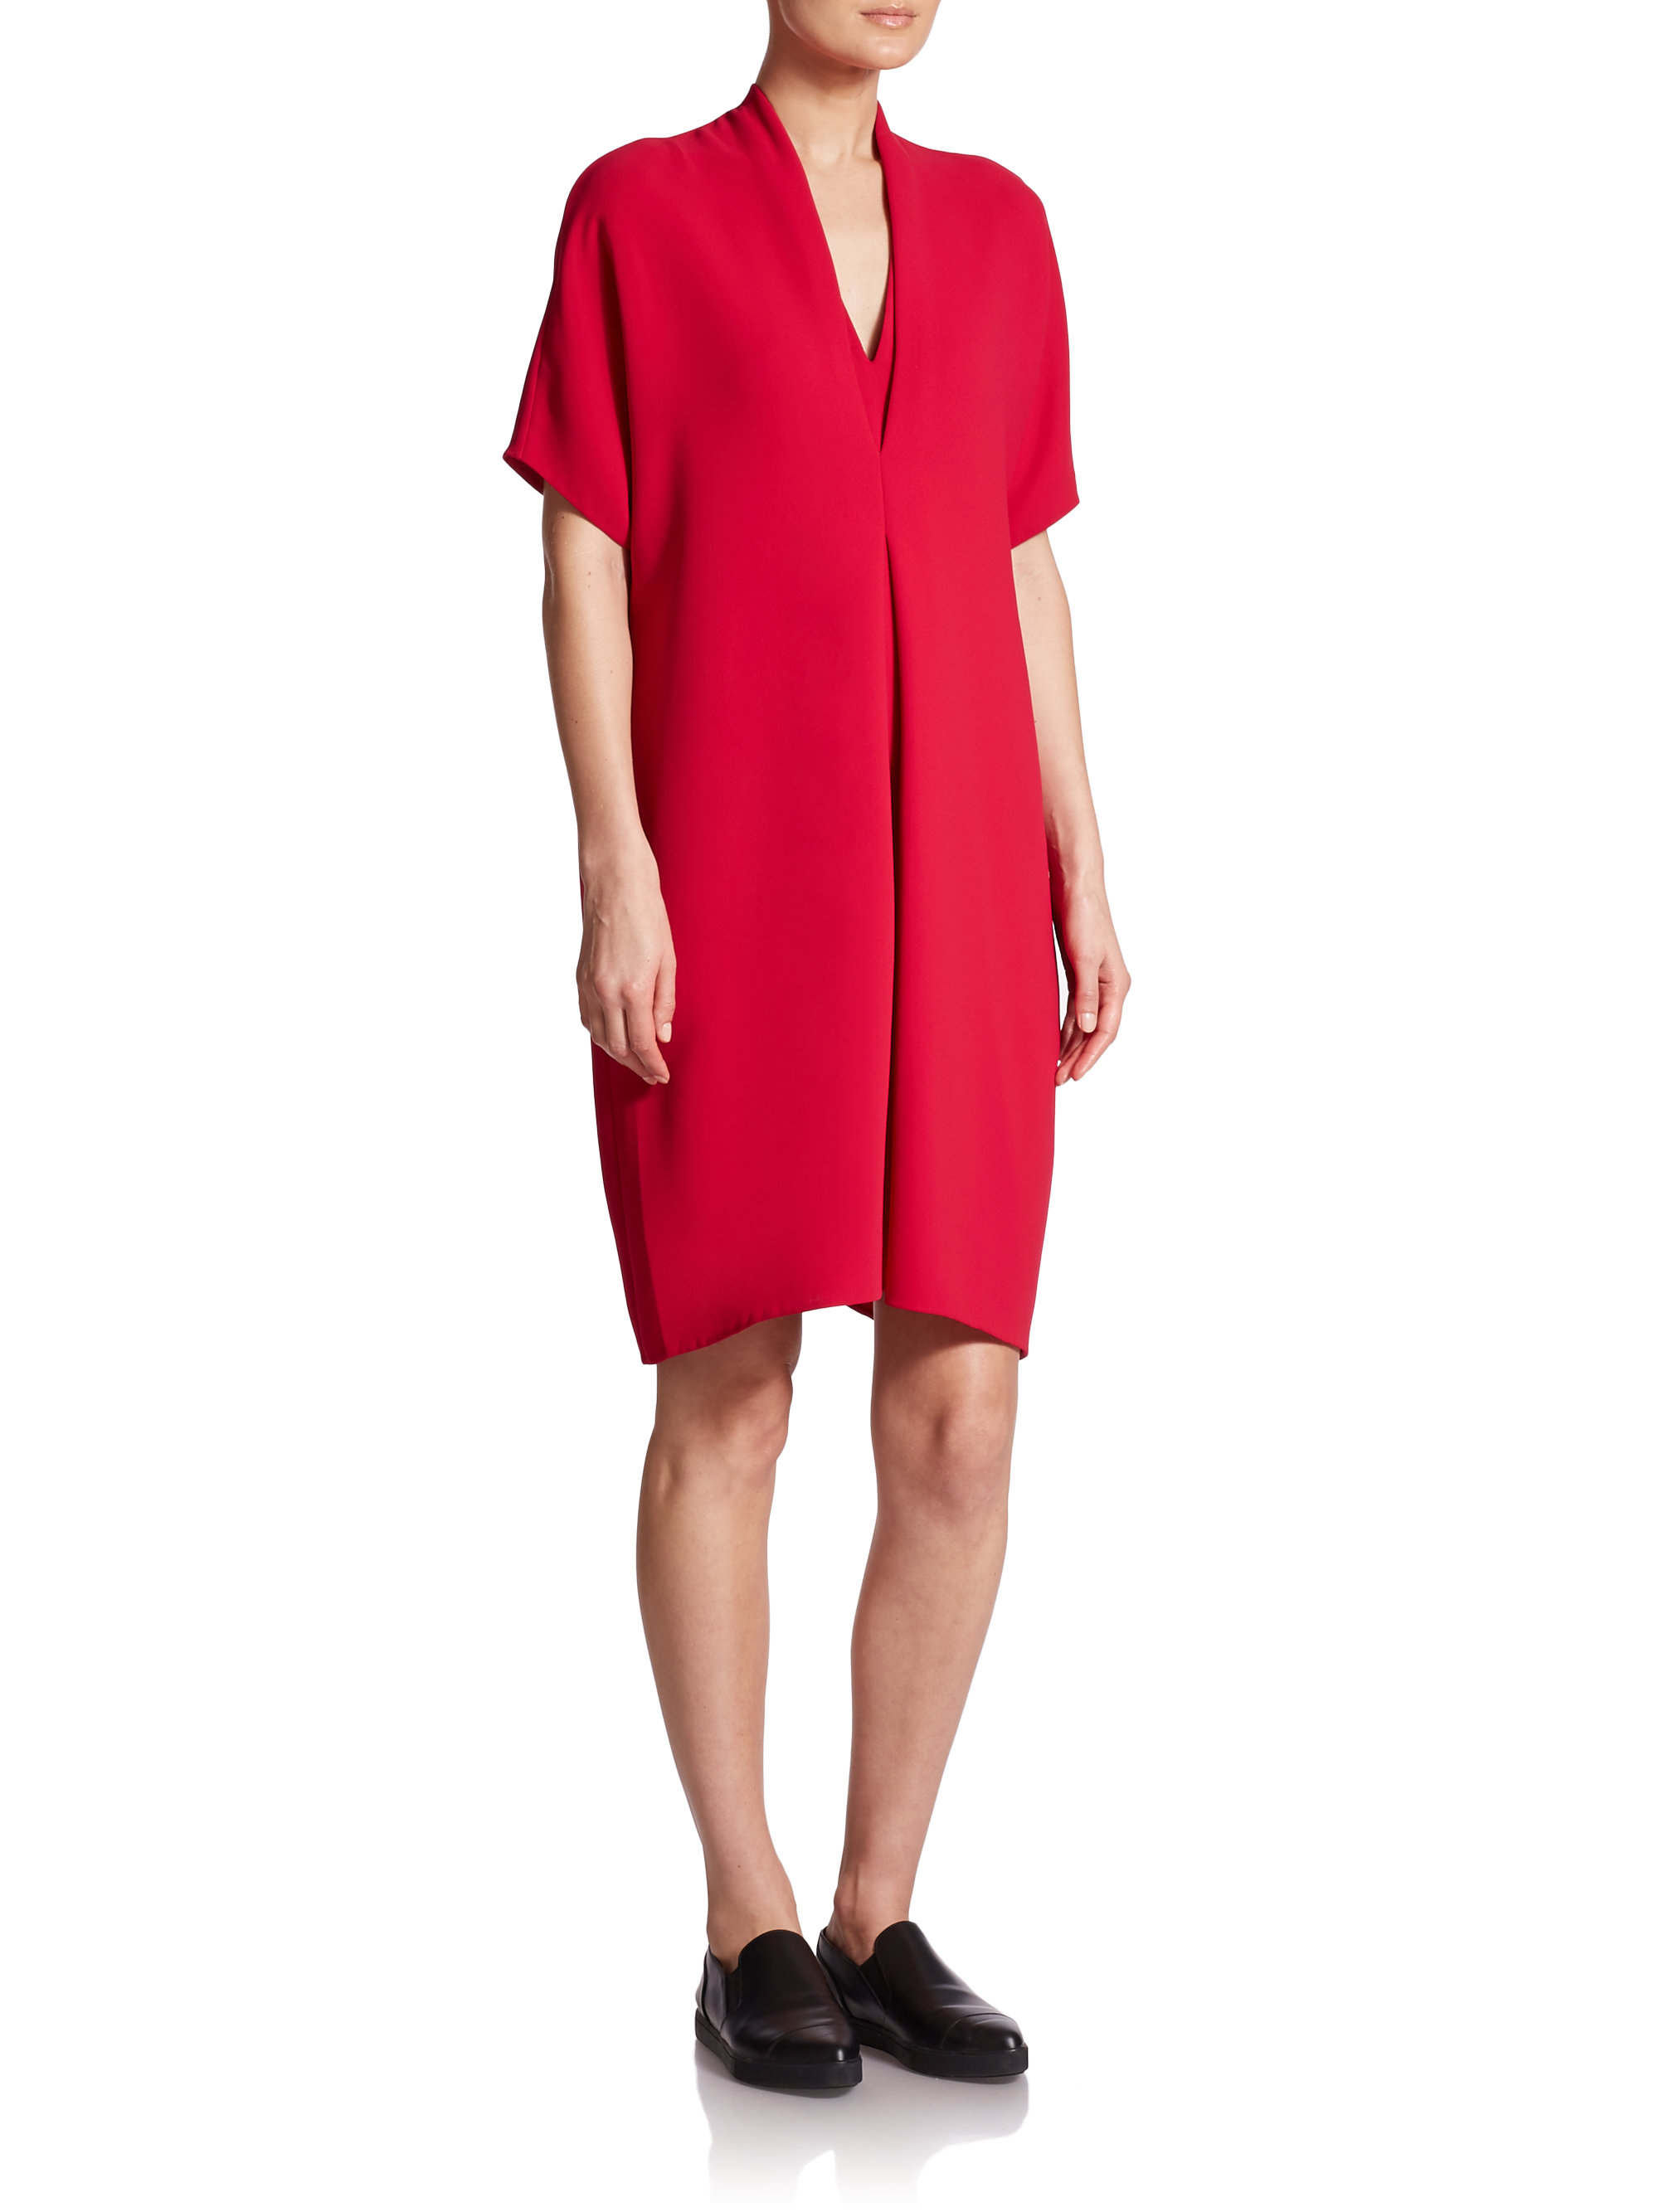 Lyst - Vince Double V-neck Shift Dress in Red